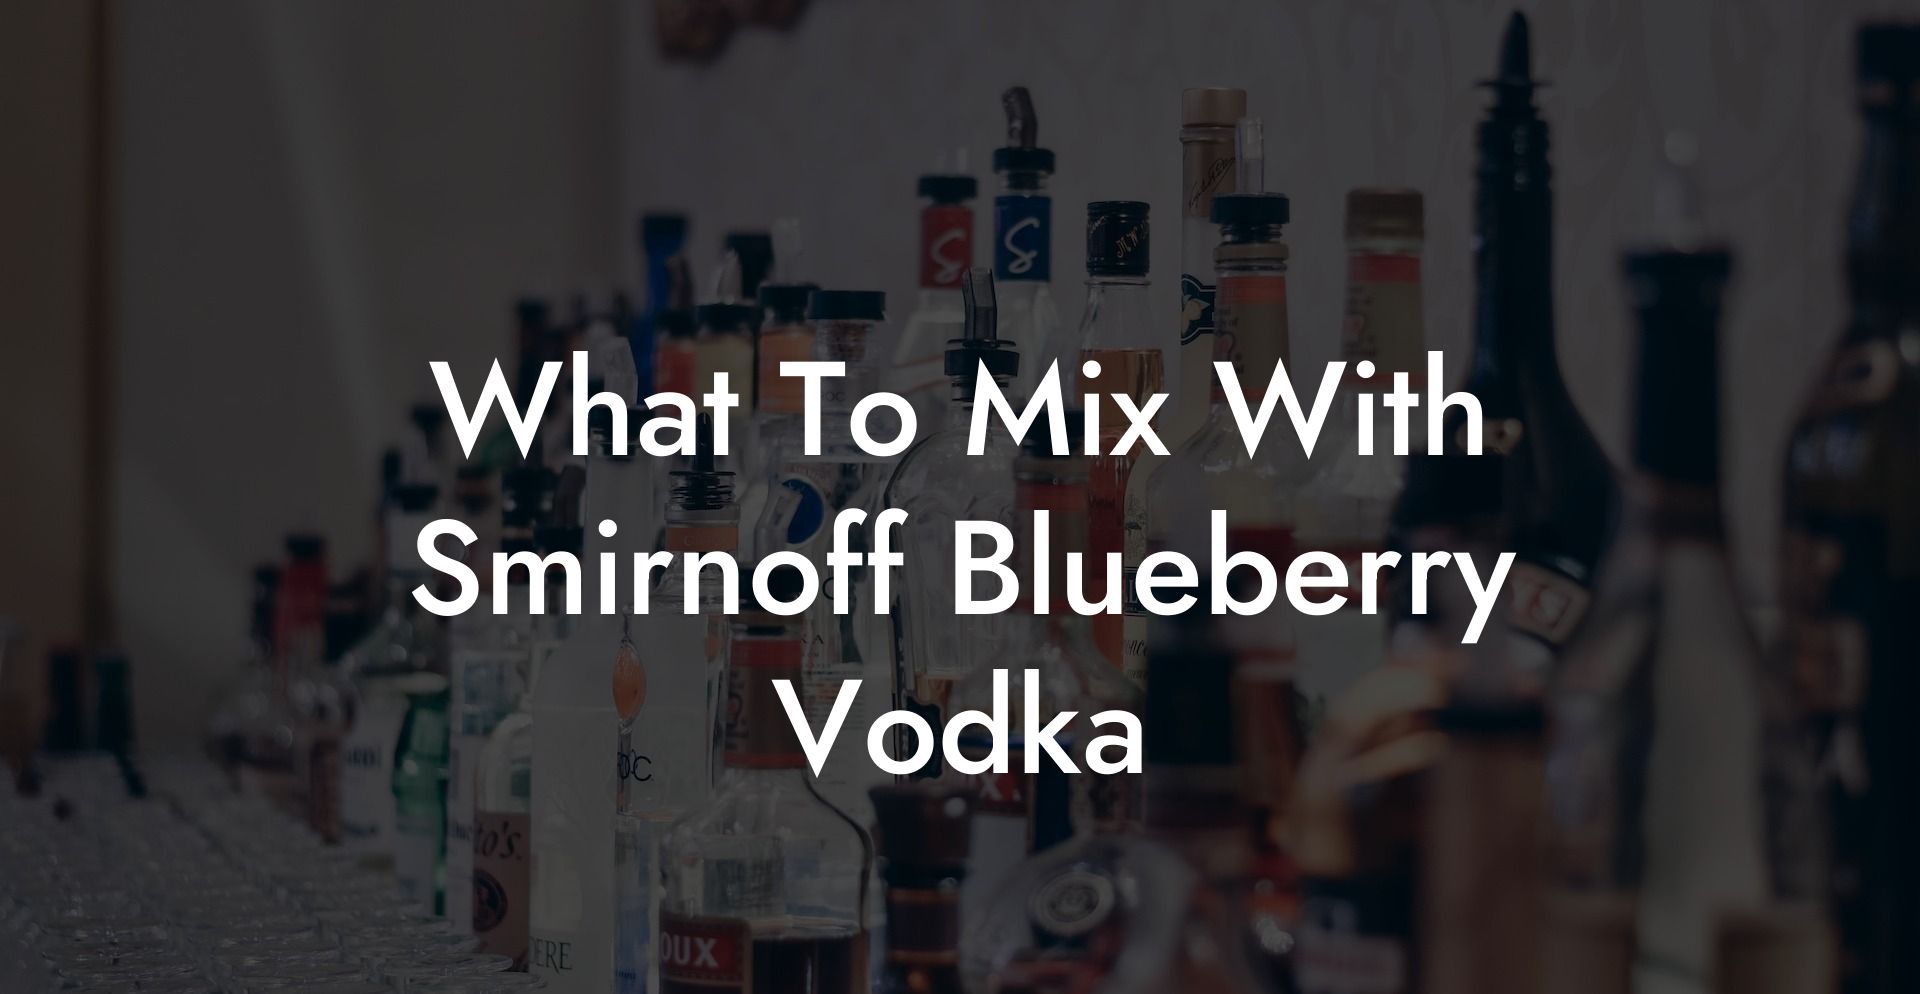 What To Mix With Smirnoff Blueberry Vodka